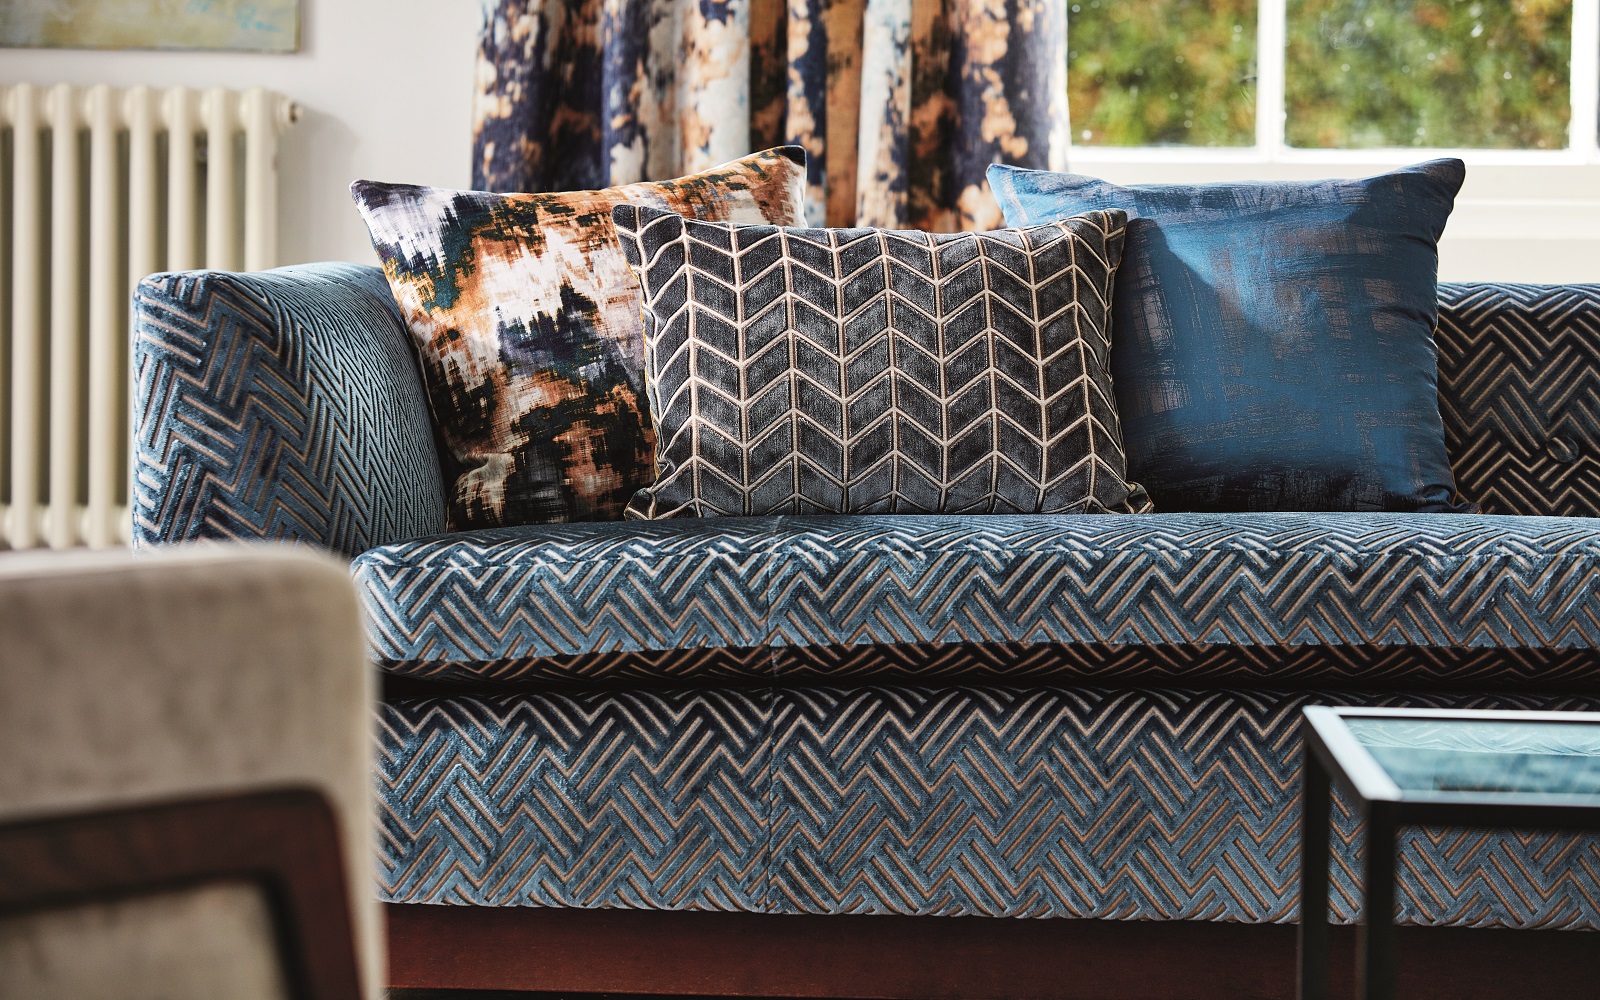 blue upholstered sofa with cushions in different patterns in front of a window - fabric by Harlequin